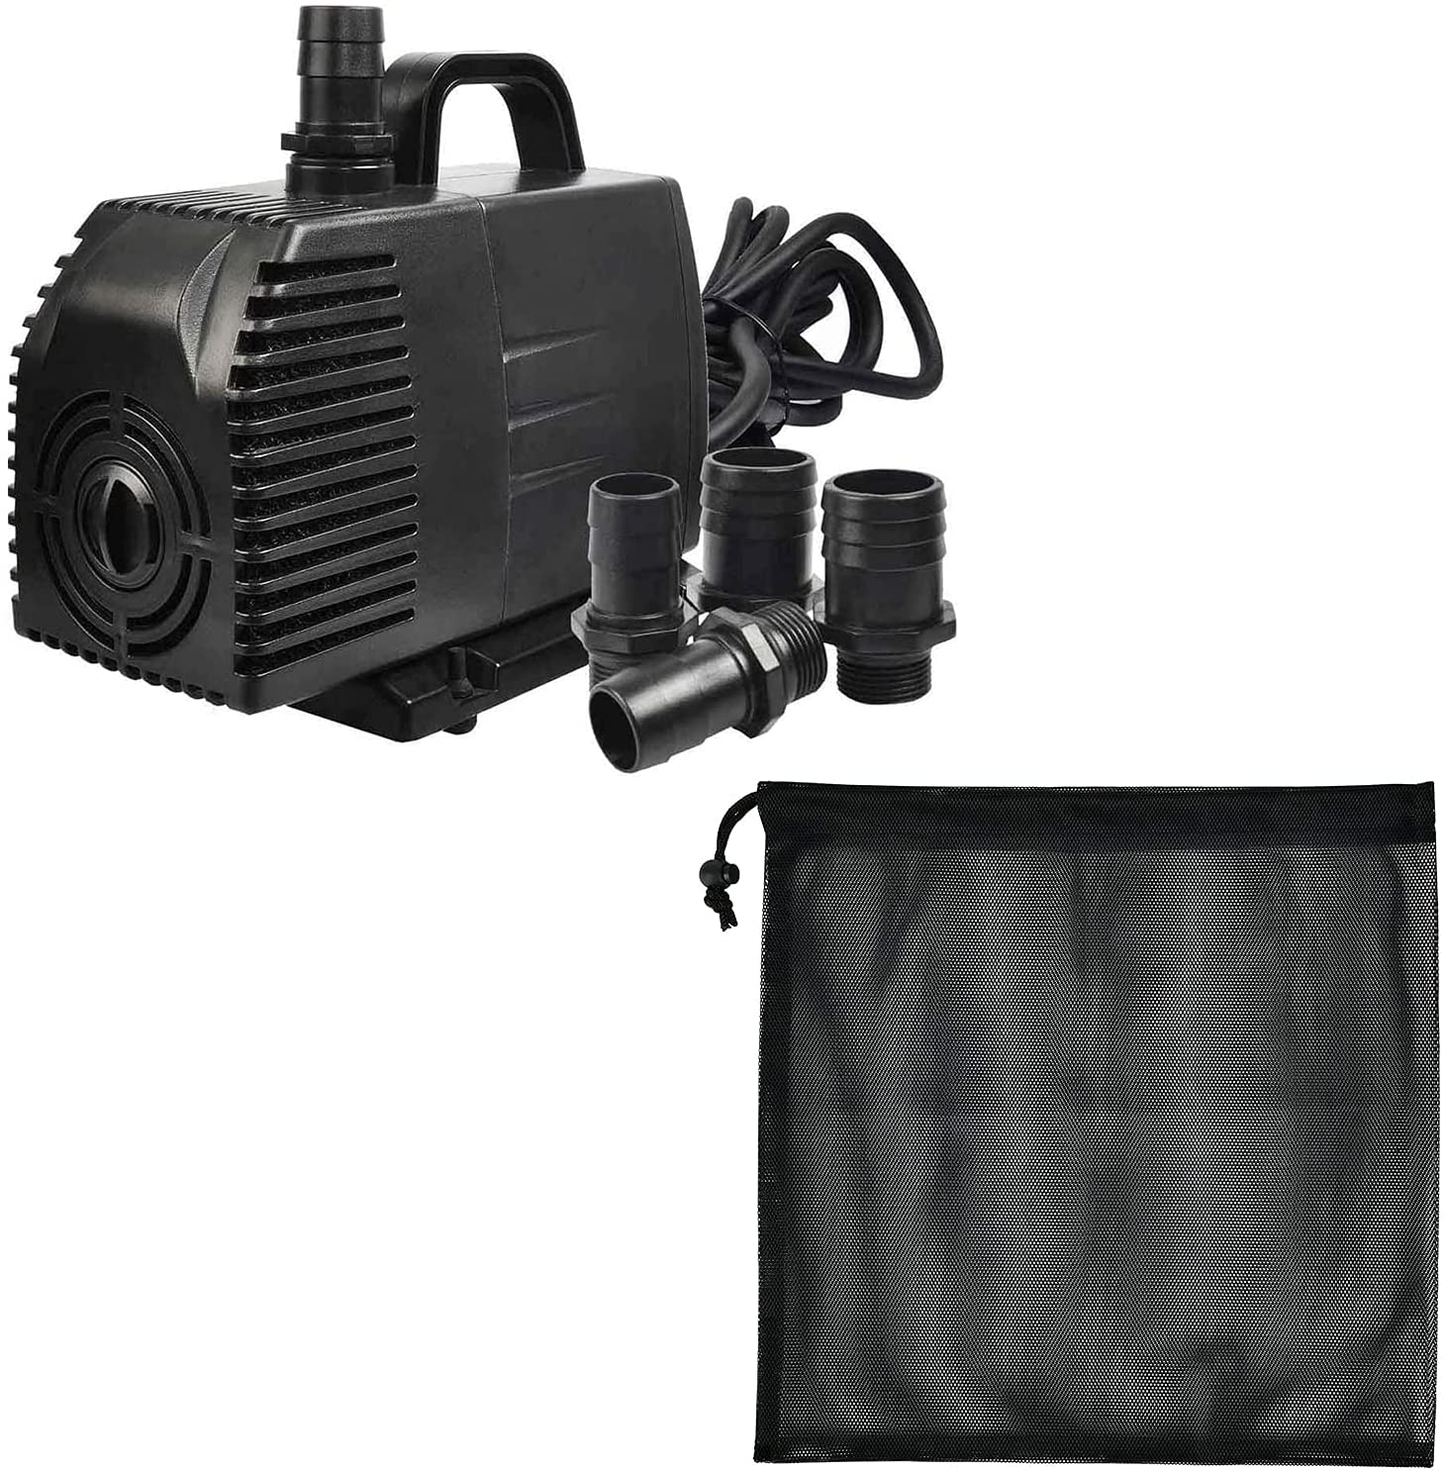 Simple Deluxe 1056 GPH Submersible Pump with 15' Cord, Water Pump for Fish Tank, Hydroponics, Aquaponics, Fountains, Ponds, Statuary, Aquariums & Inline Animals & Pet Supplies > Pet Supplies > Fish Supplies > Aquarium & Pond Tubing Simple Deluxe 1056GPH Water Pump + Filter Bag  